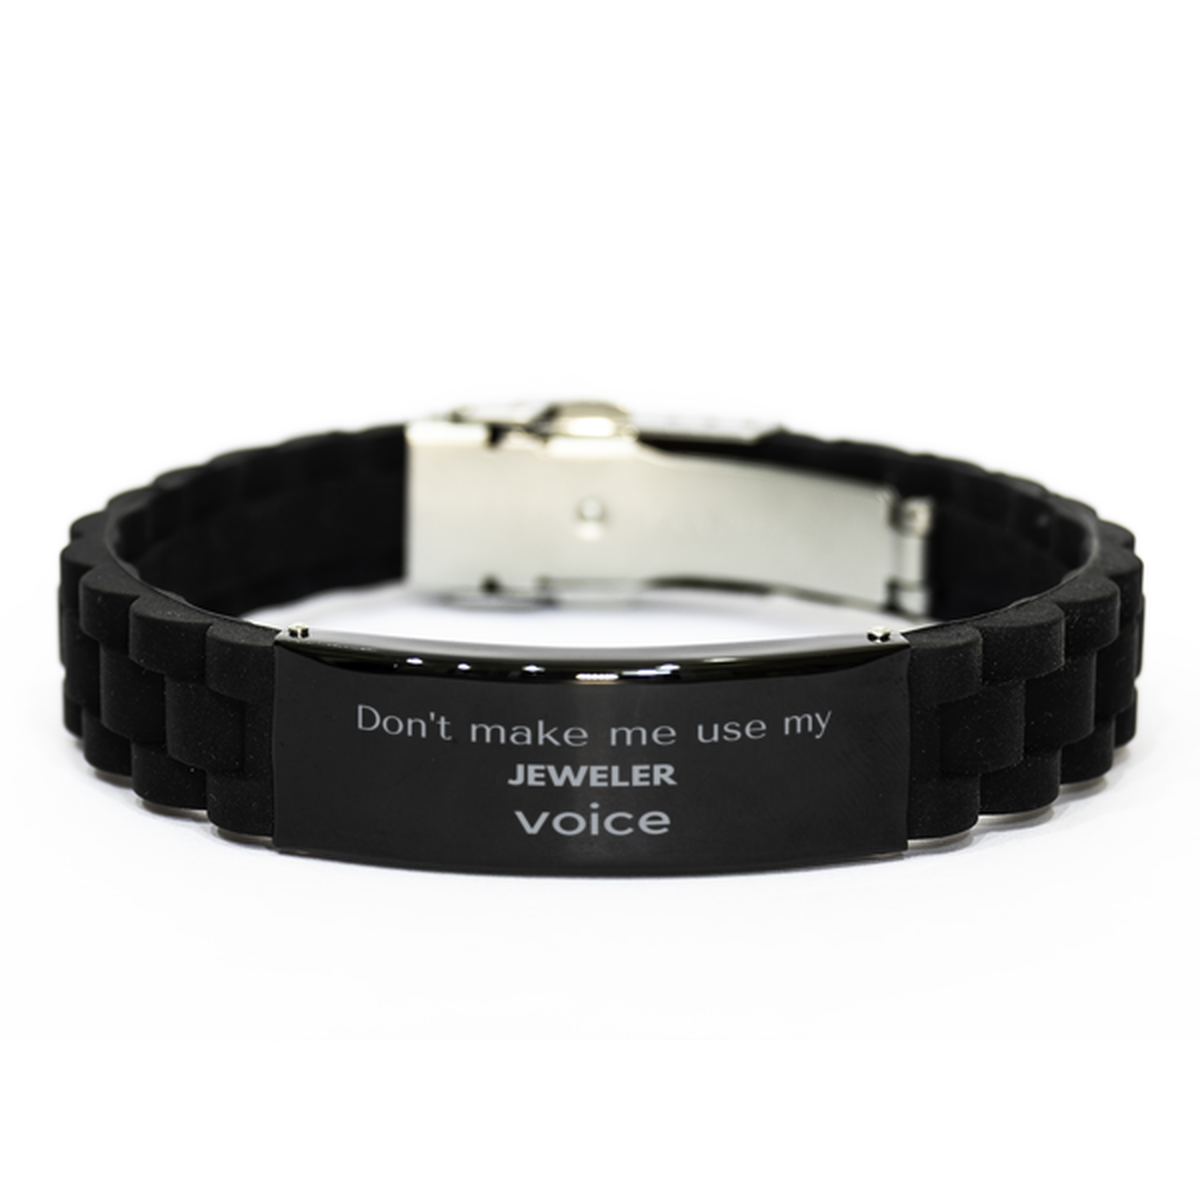 Don't make me use my Jeweler voice, Sarcasm Jeweler Gifts, Christmas Jeweler Black Glidelock Clasp Bracelet Birthday Unique Gifts For Jeweler Coworkers, Men, Women, Colleague, Friends